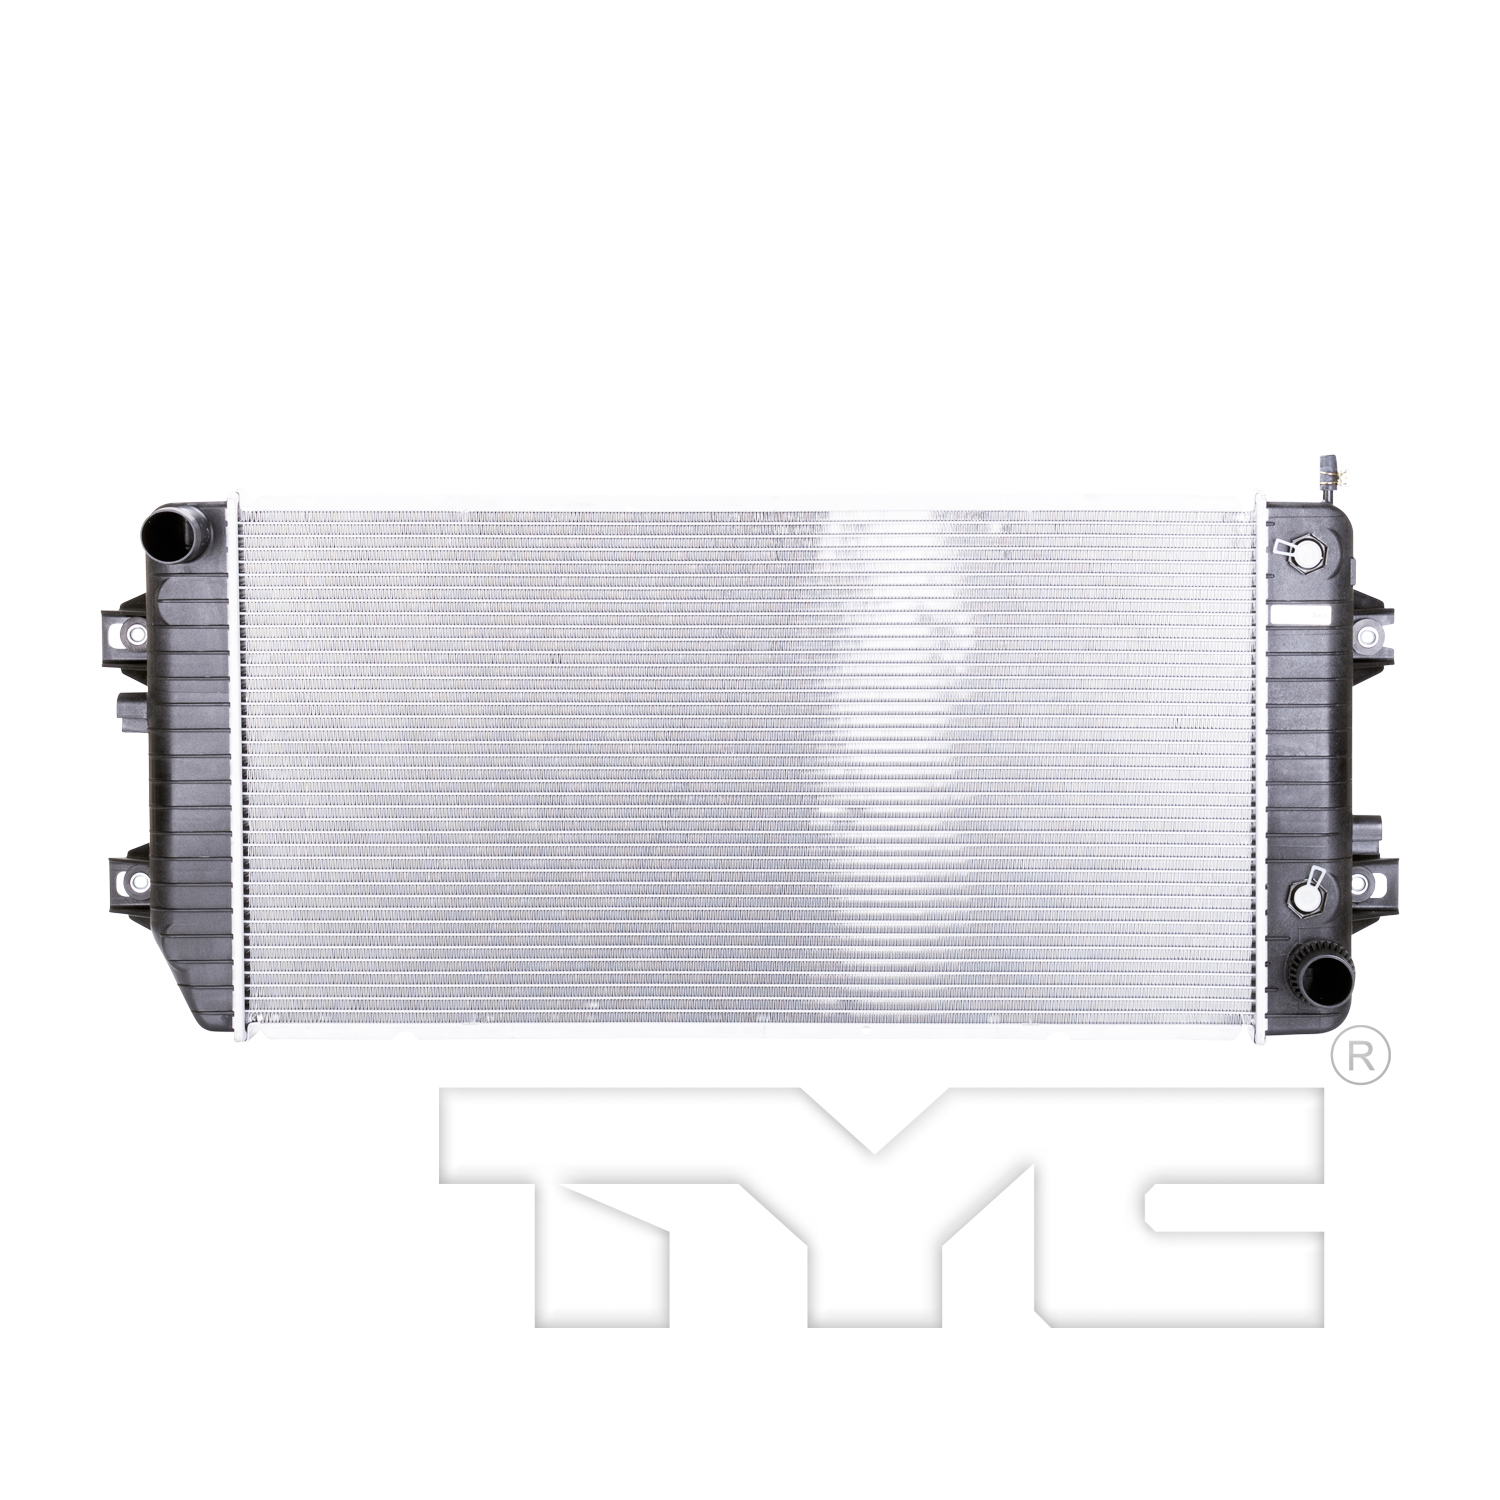 Aftermarket RADIATORS for CHEVROLET - EXPRESS 1500, EXPRESS 1500,03-14,Radiator assembly